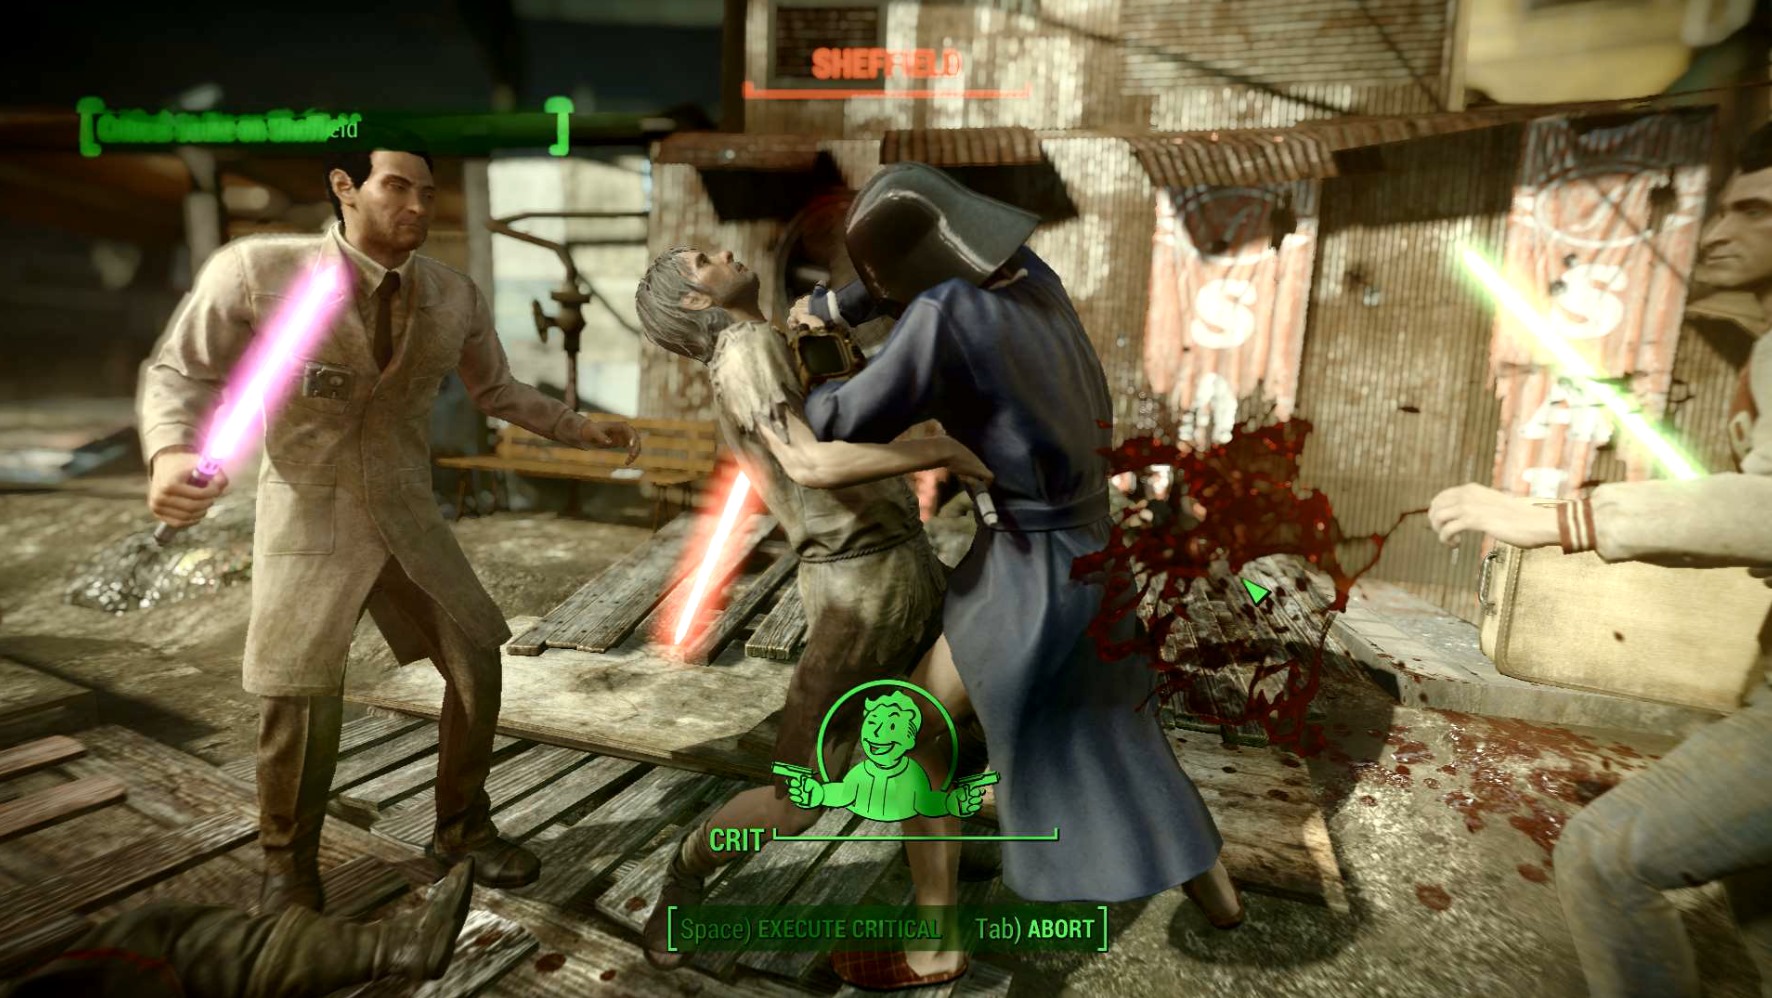 Star wars the lightsaber fallout 4 фото 16